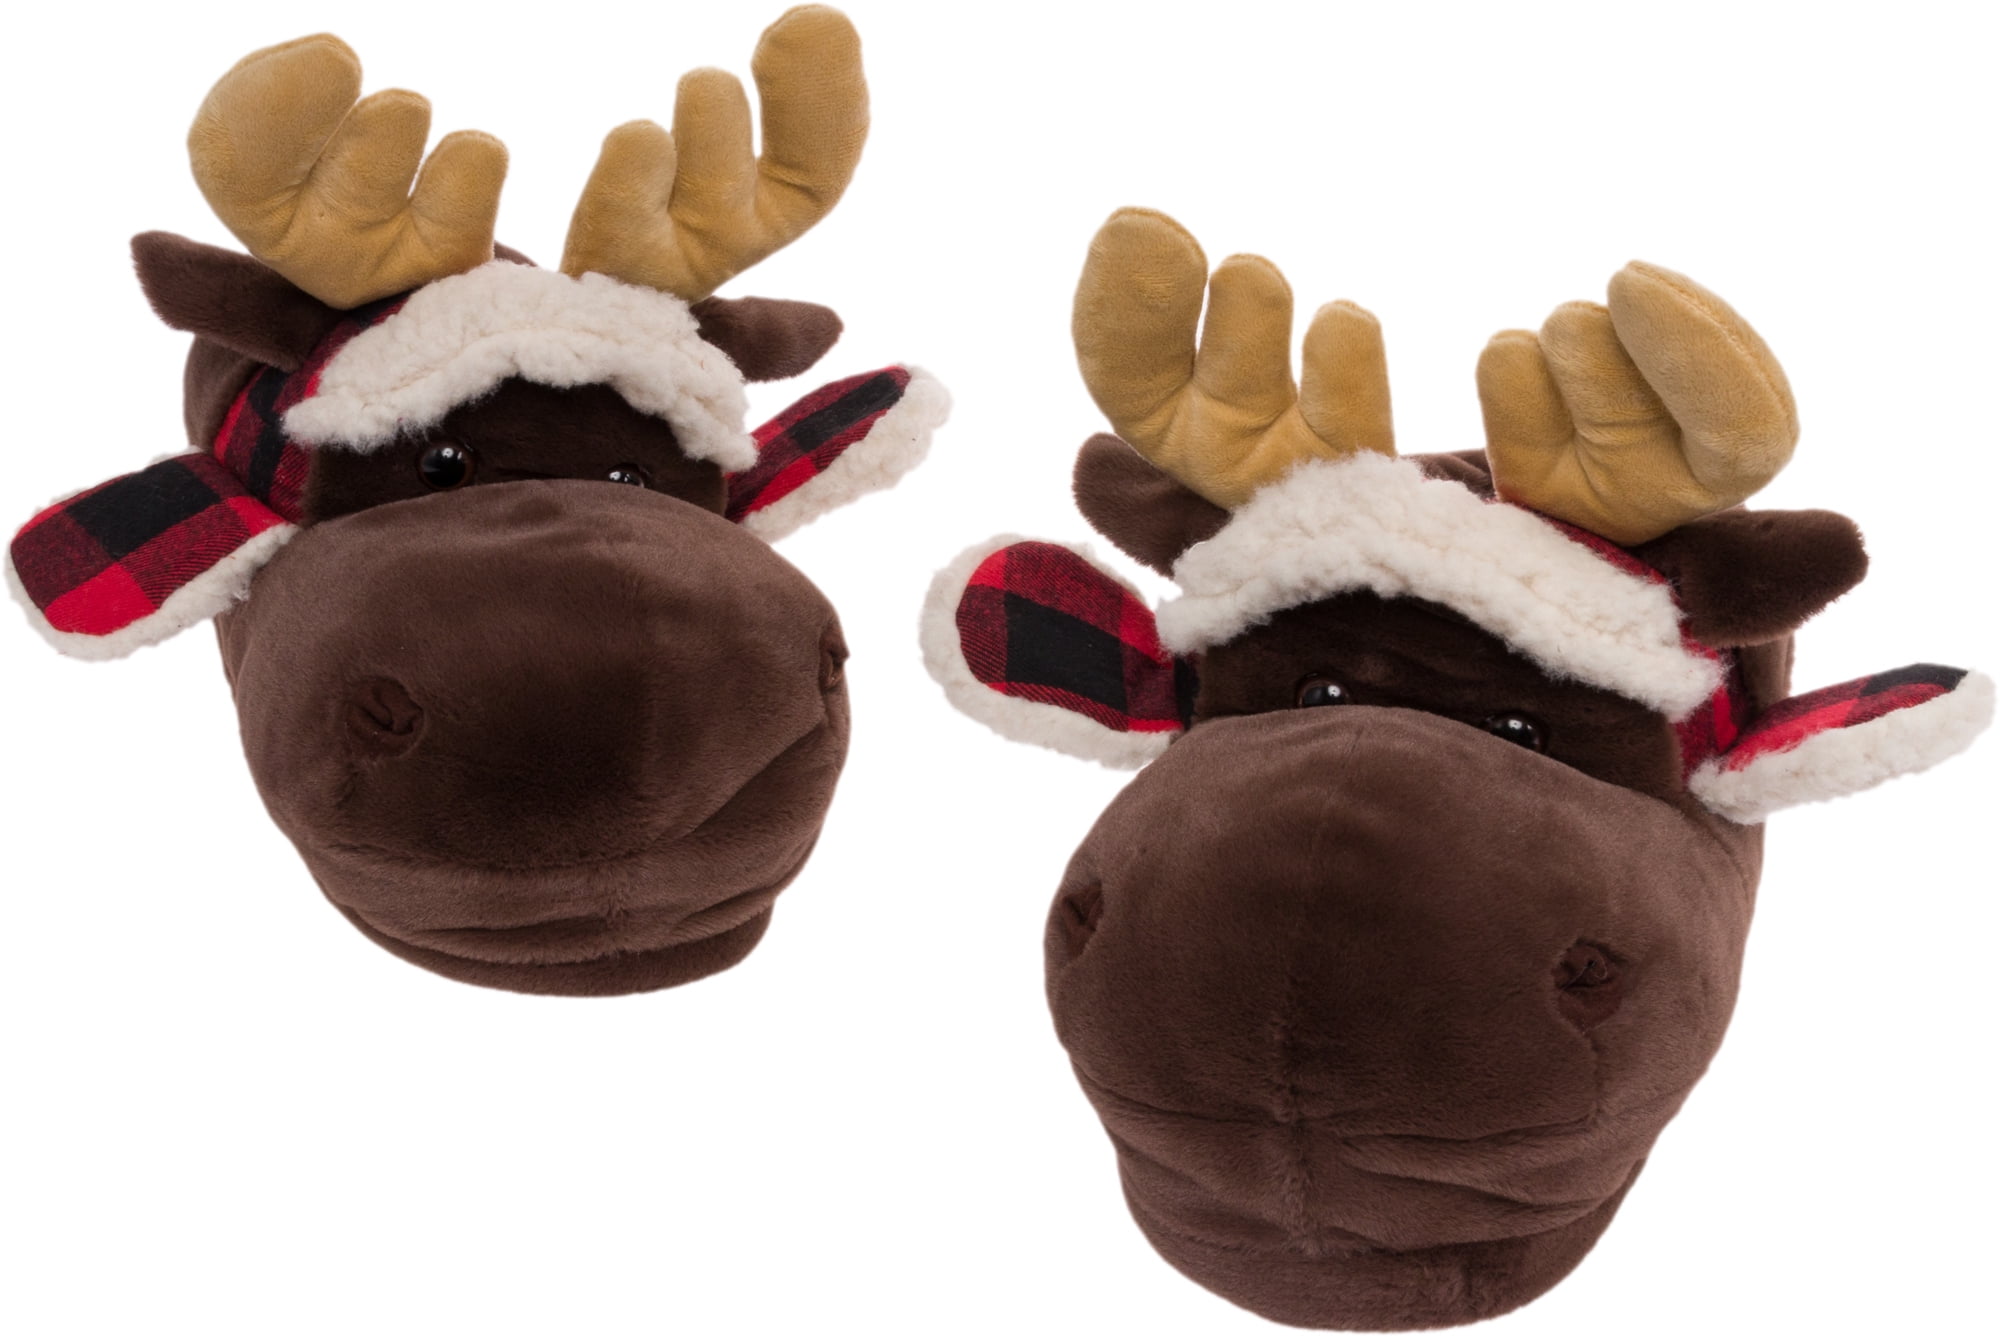 L/XL Ladies Soft Fuzzy House Slippers Chocolate Moose Womens Plush Fuzzy Feet Slippers by LazyOne